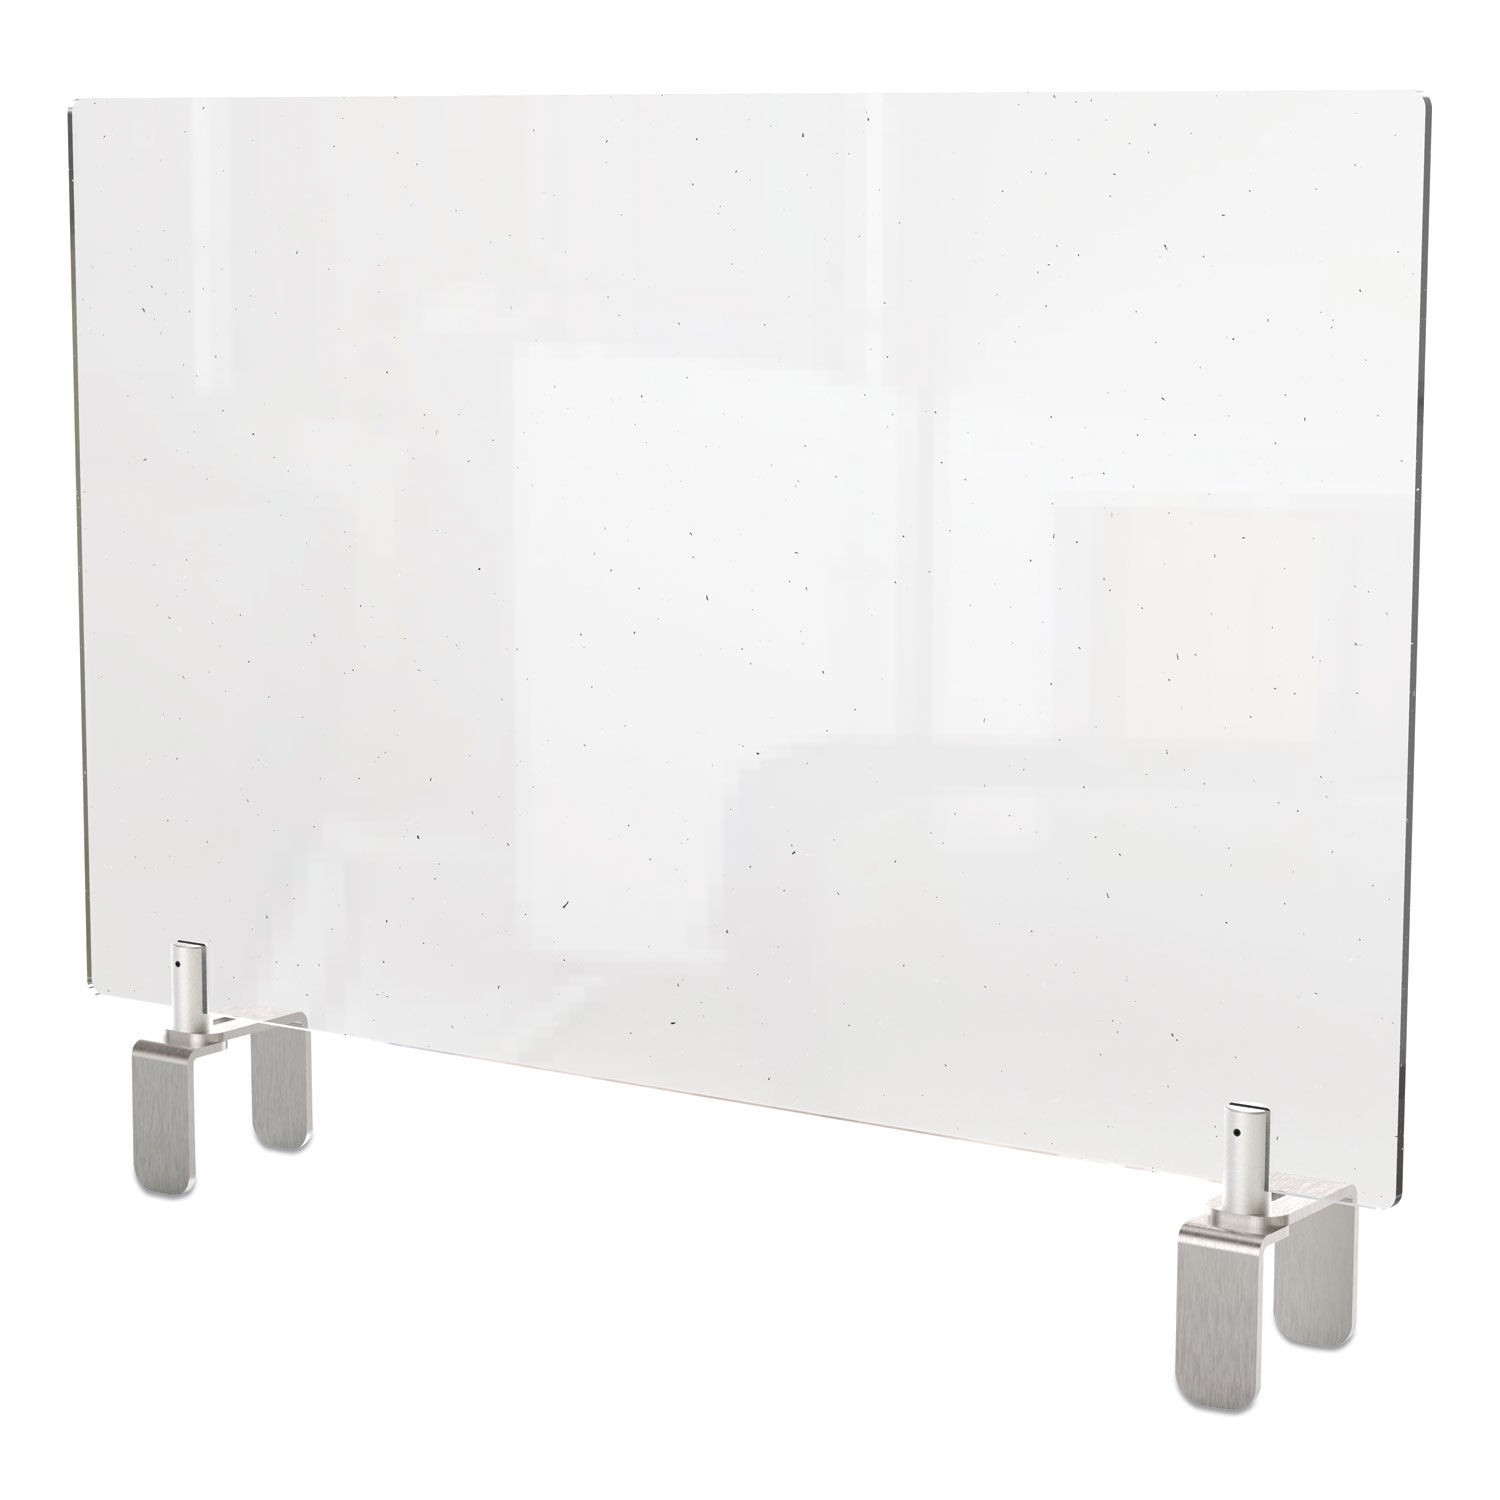 Ghent Clear Partition Extender with Attached Clamp, 42"x 3.88" x 18", Thermoplastic Sheeting